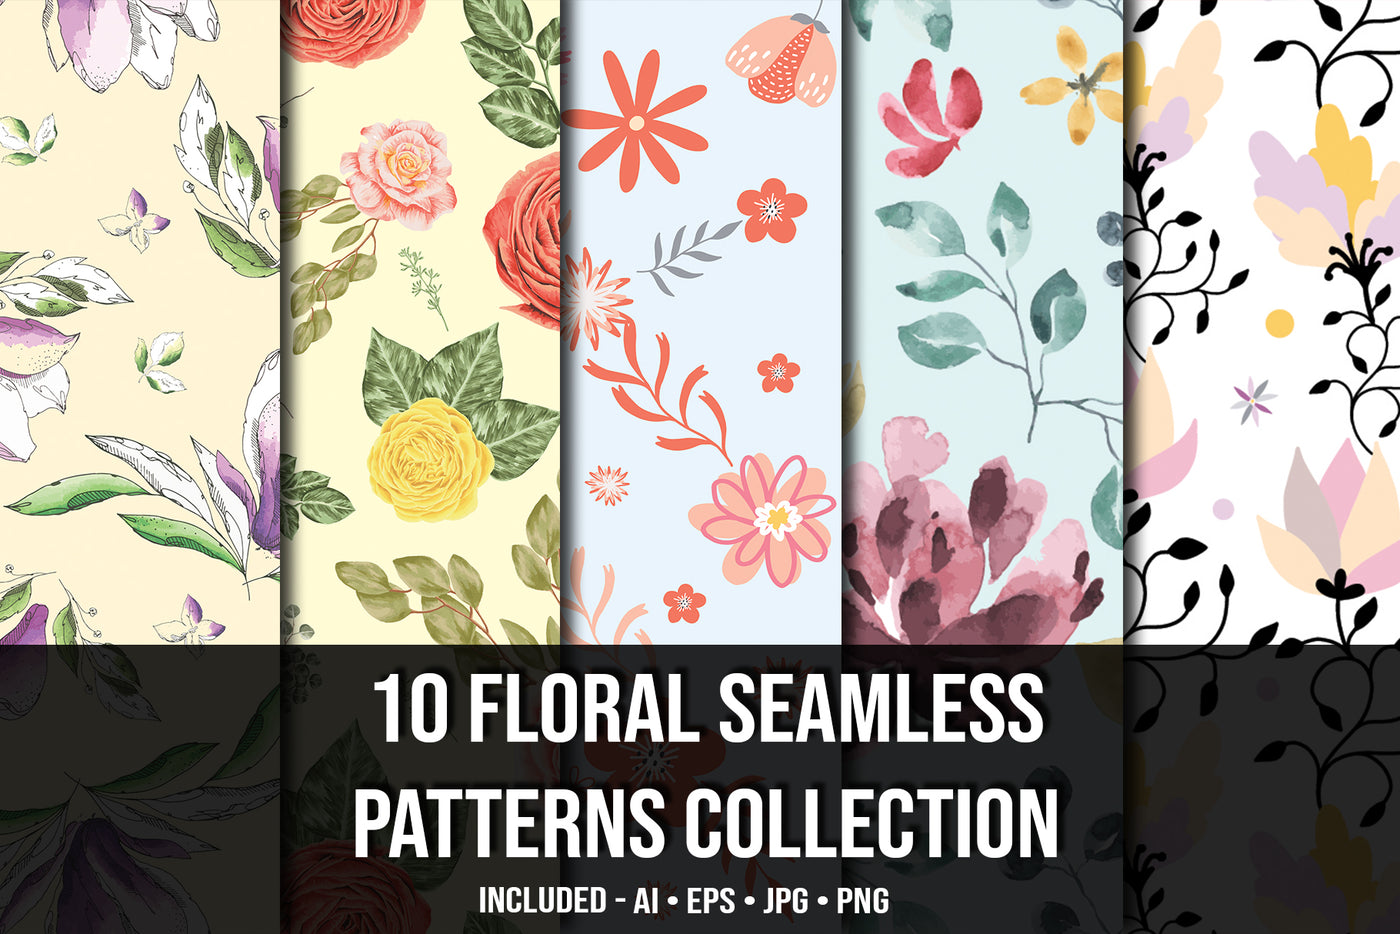 All In One Unique Seamless Patterns Collection | Artixty